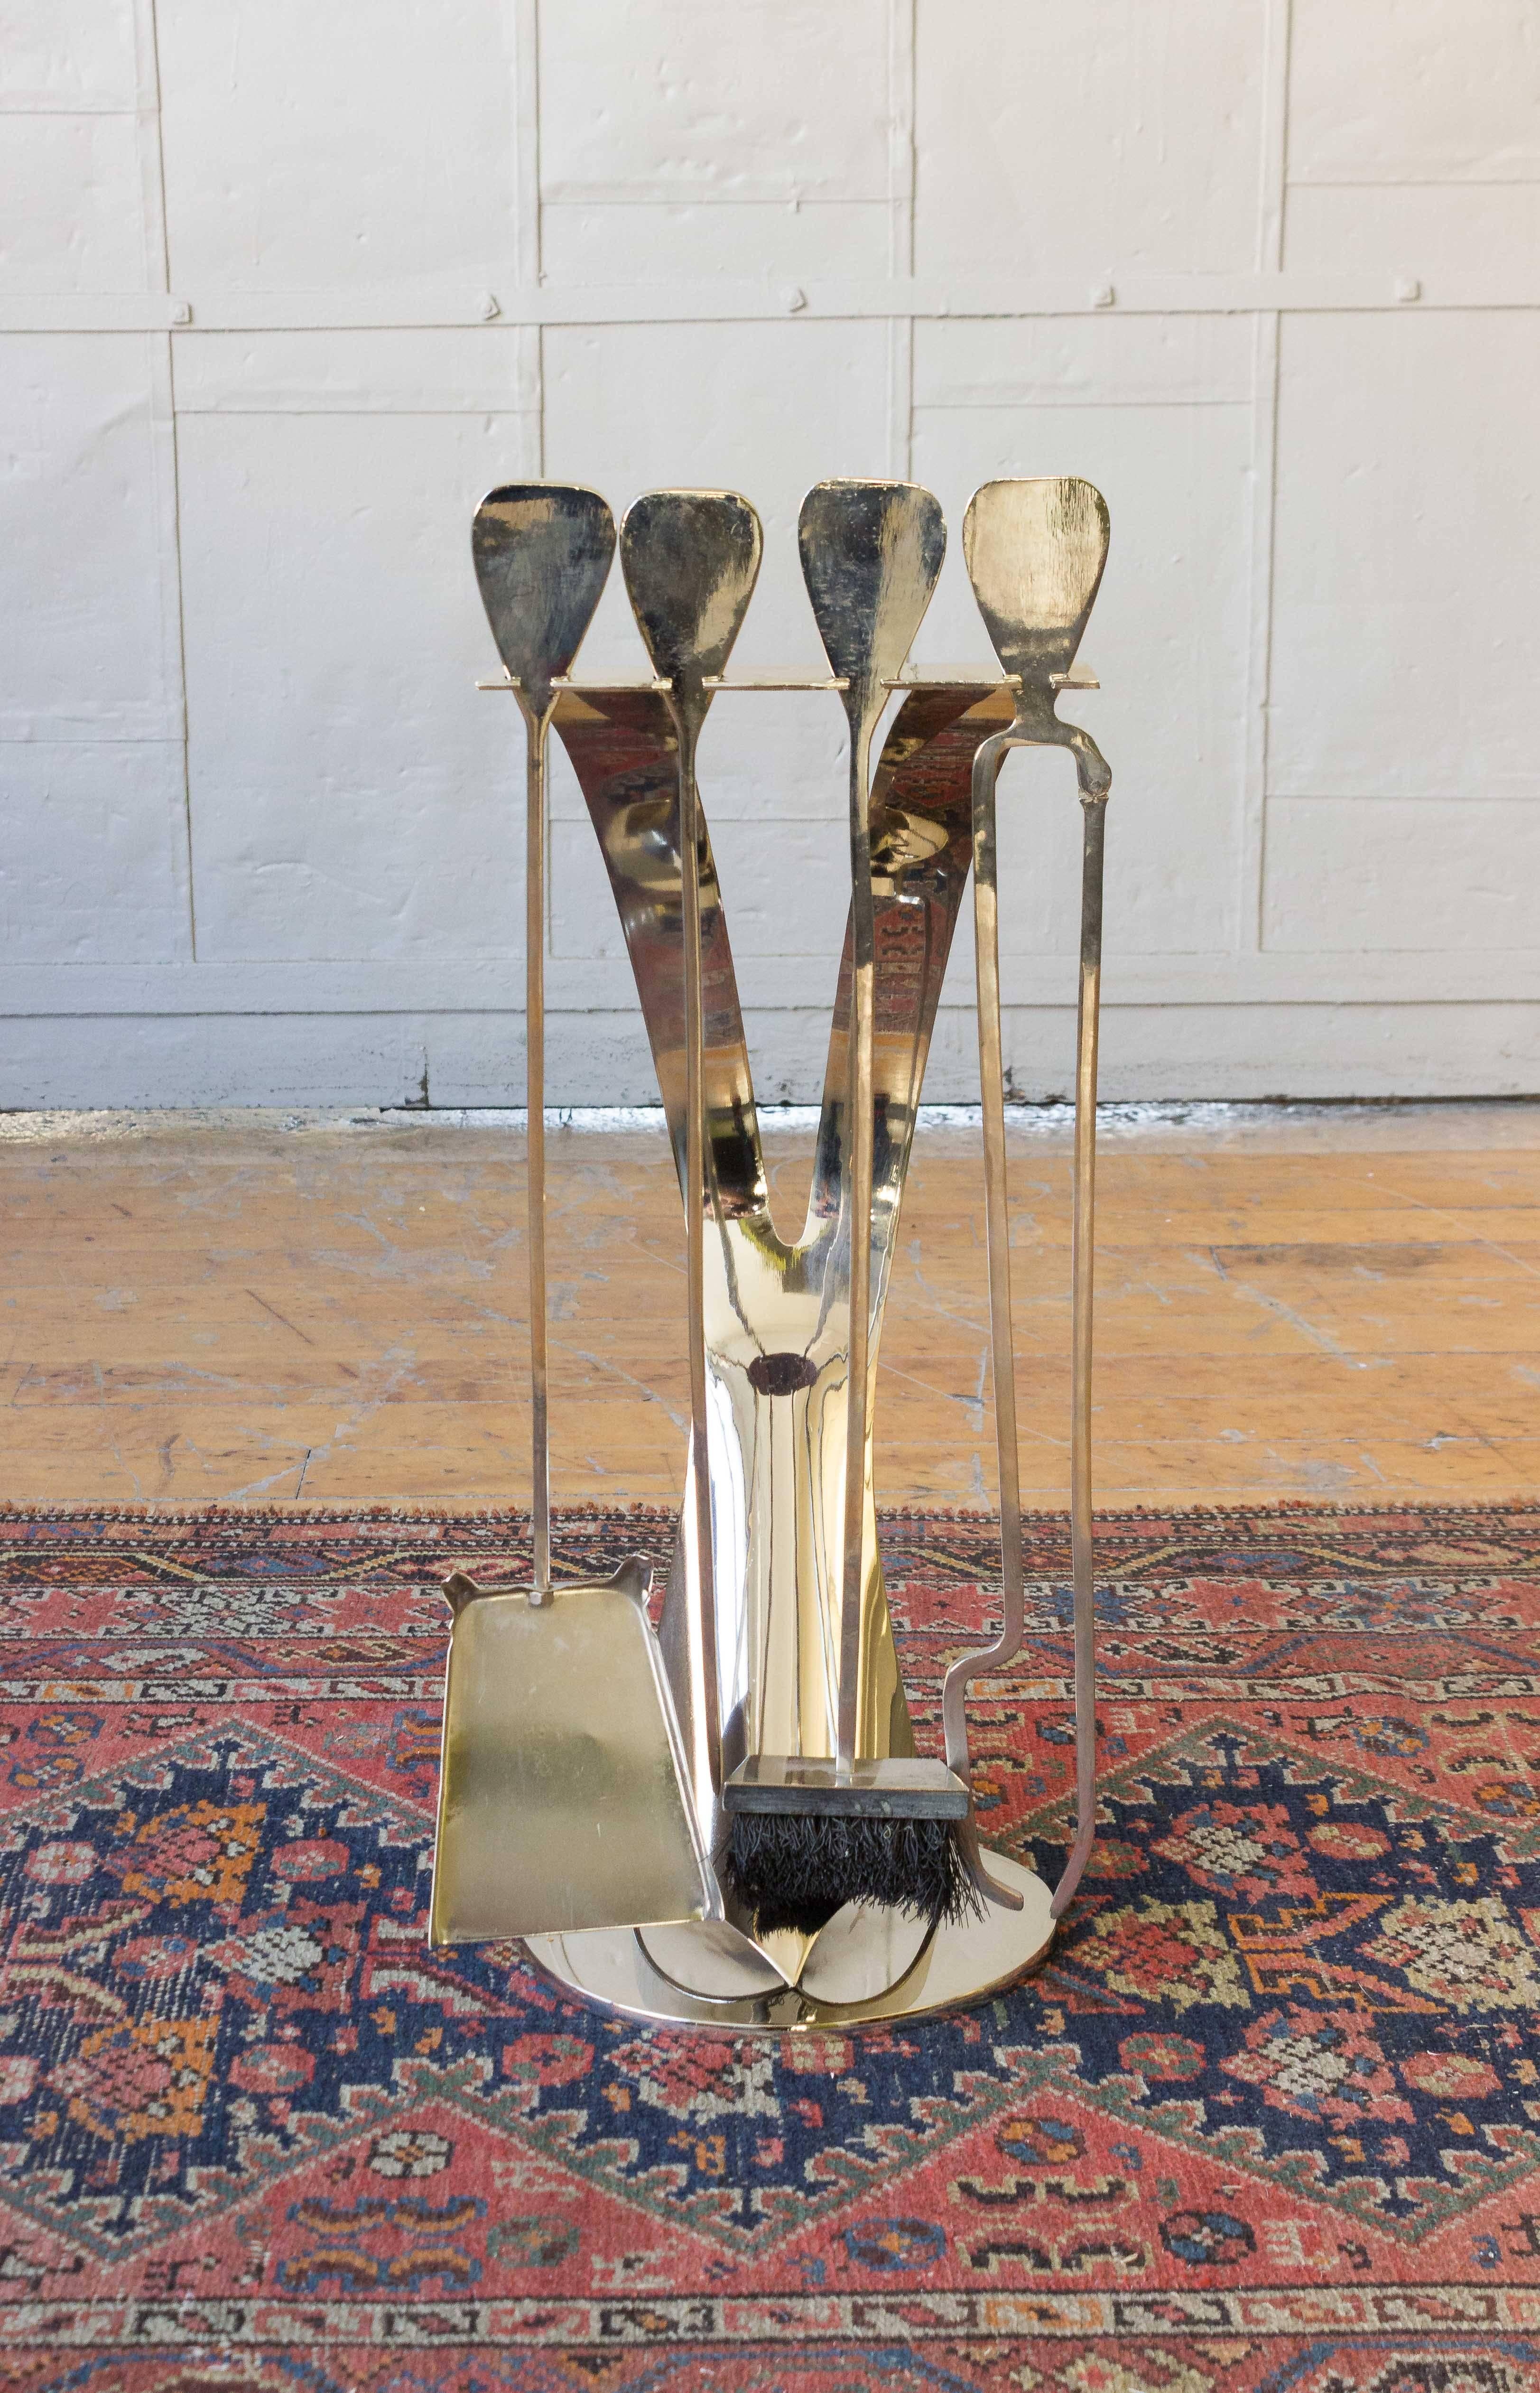 Five-piece set of Mid-Century Modern nickel-plated fireplace tools, French, 1960s.